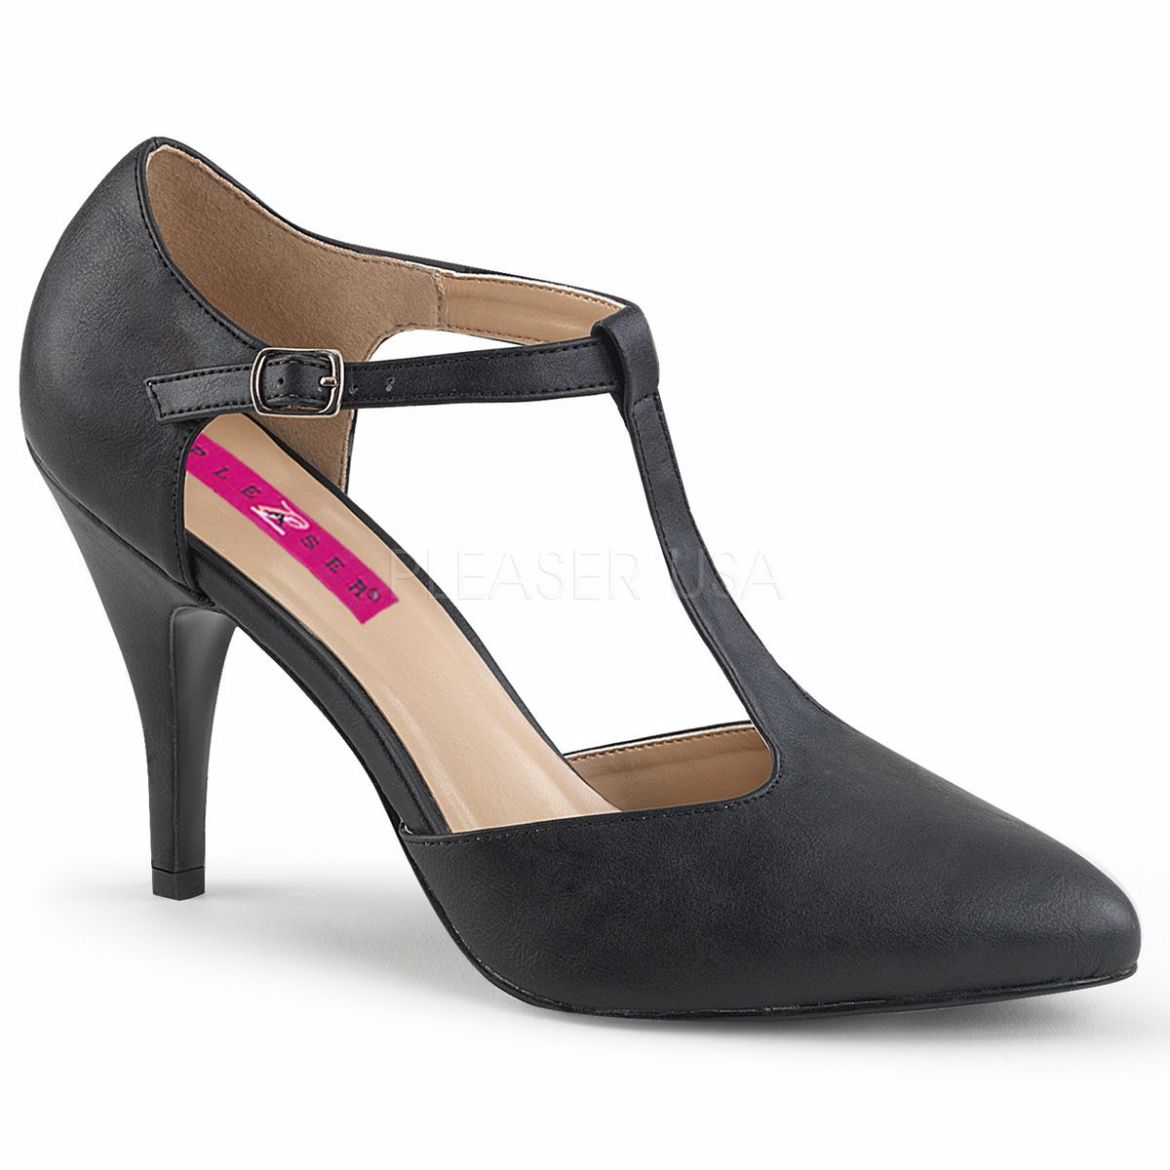 Product image of Pleaser Pink Label Dream-425 Black Faux Leather, 4 inch (10.2 cm) Heel Court Pump Shoes